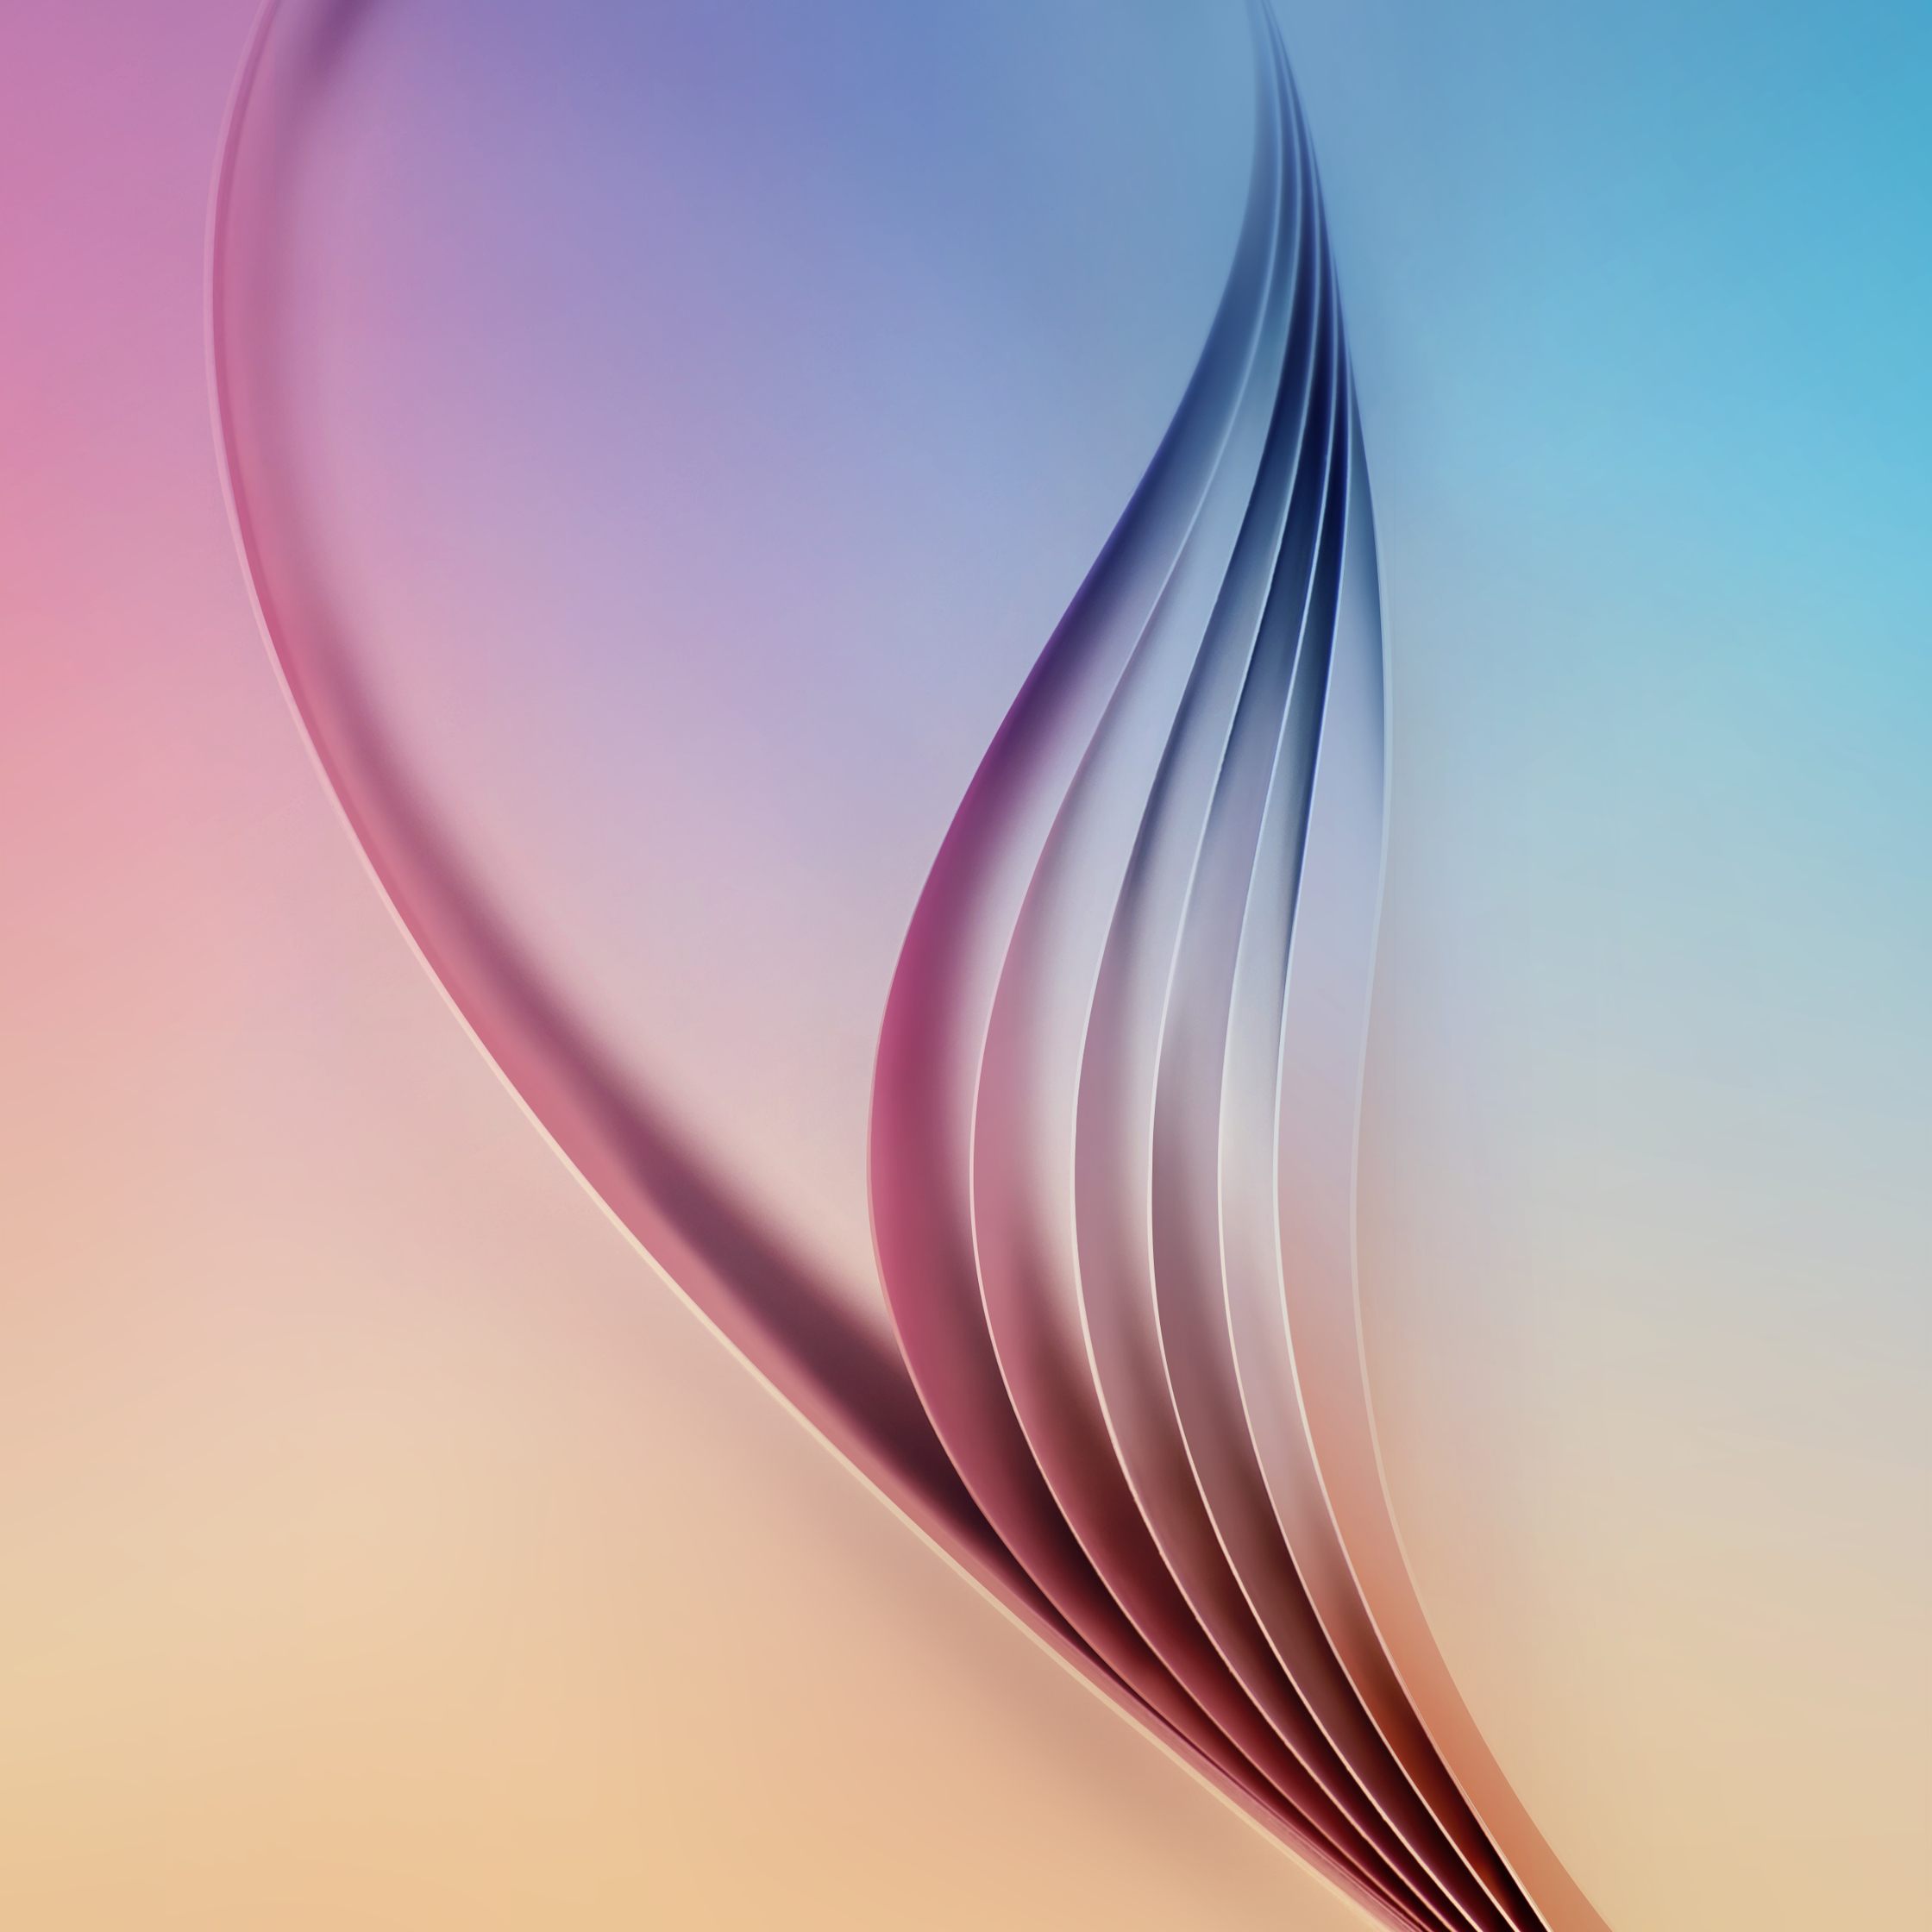 Grab Samsung S Galaxy S6 Apps And Wallpaper Here